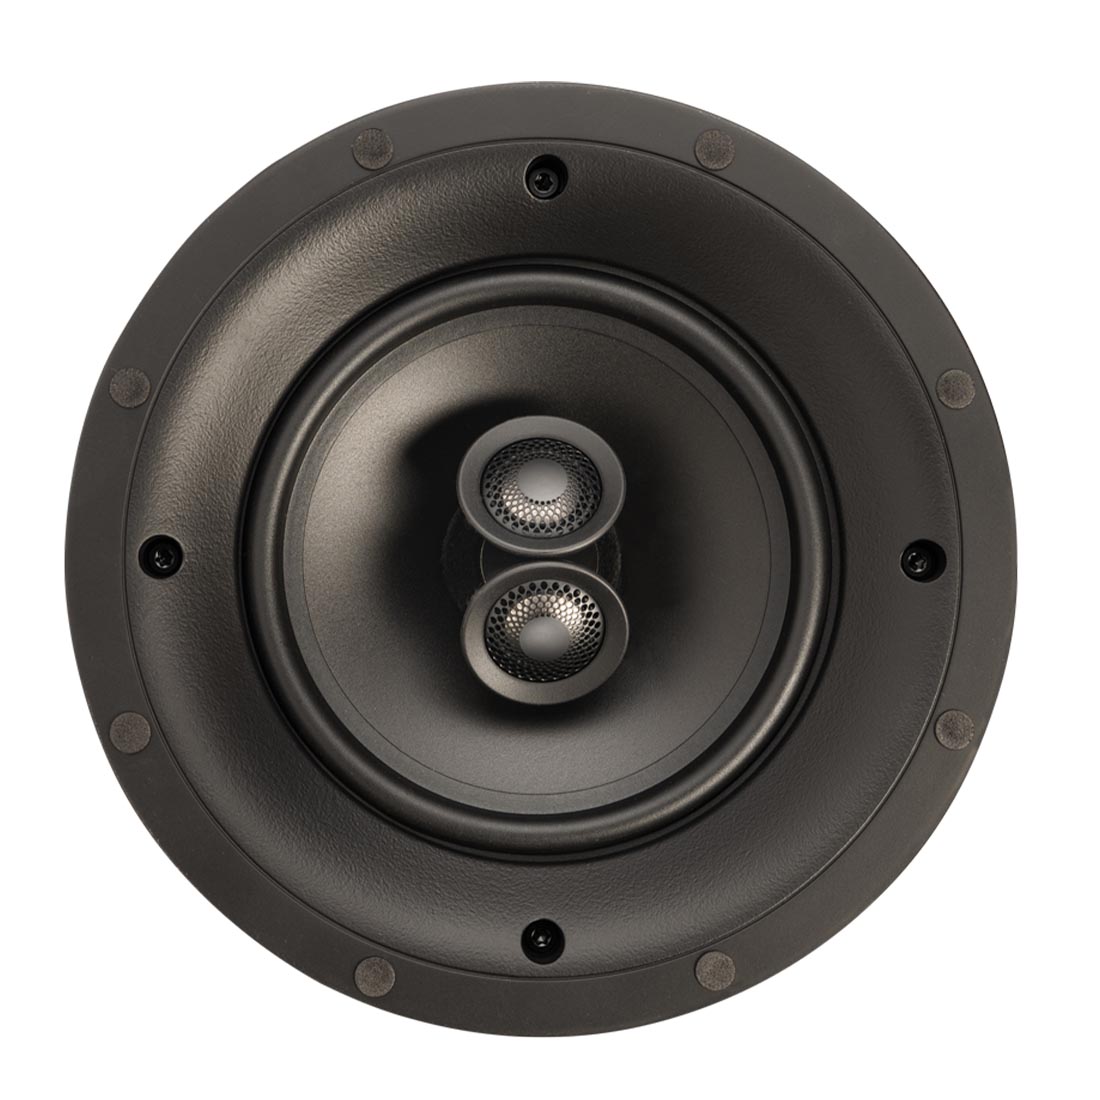 Paradigm CI Home H65-SM v2 6.5” Round In-Ceiling Speaker with Dual-Directional Soundfield - Each